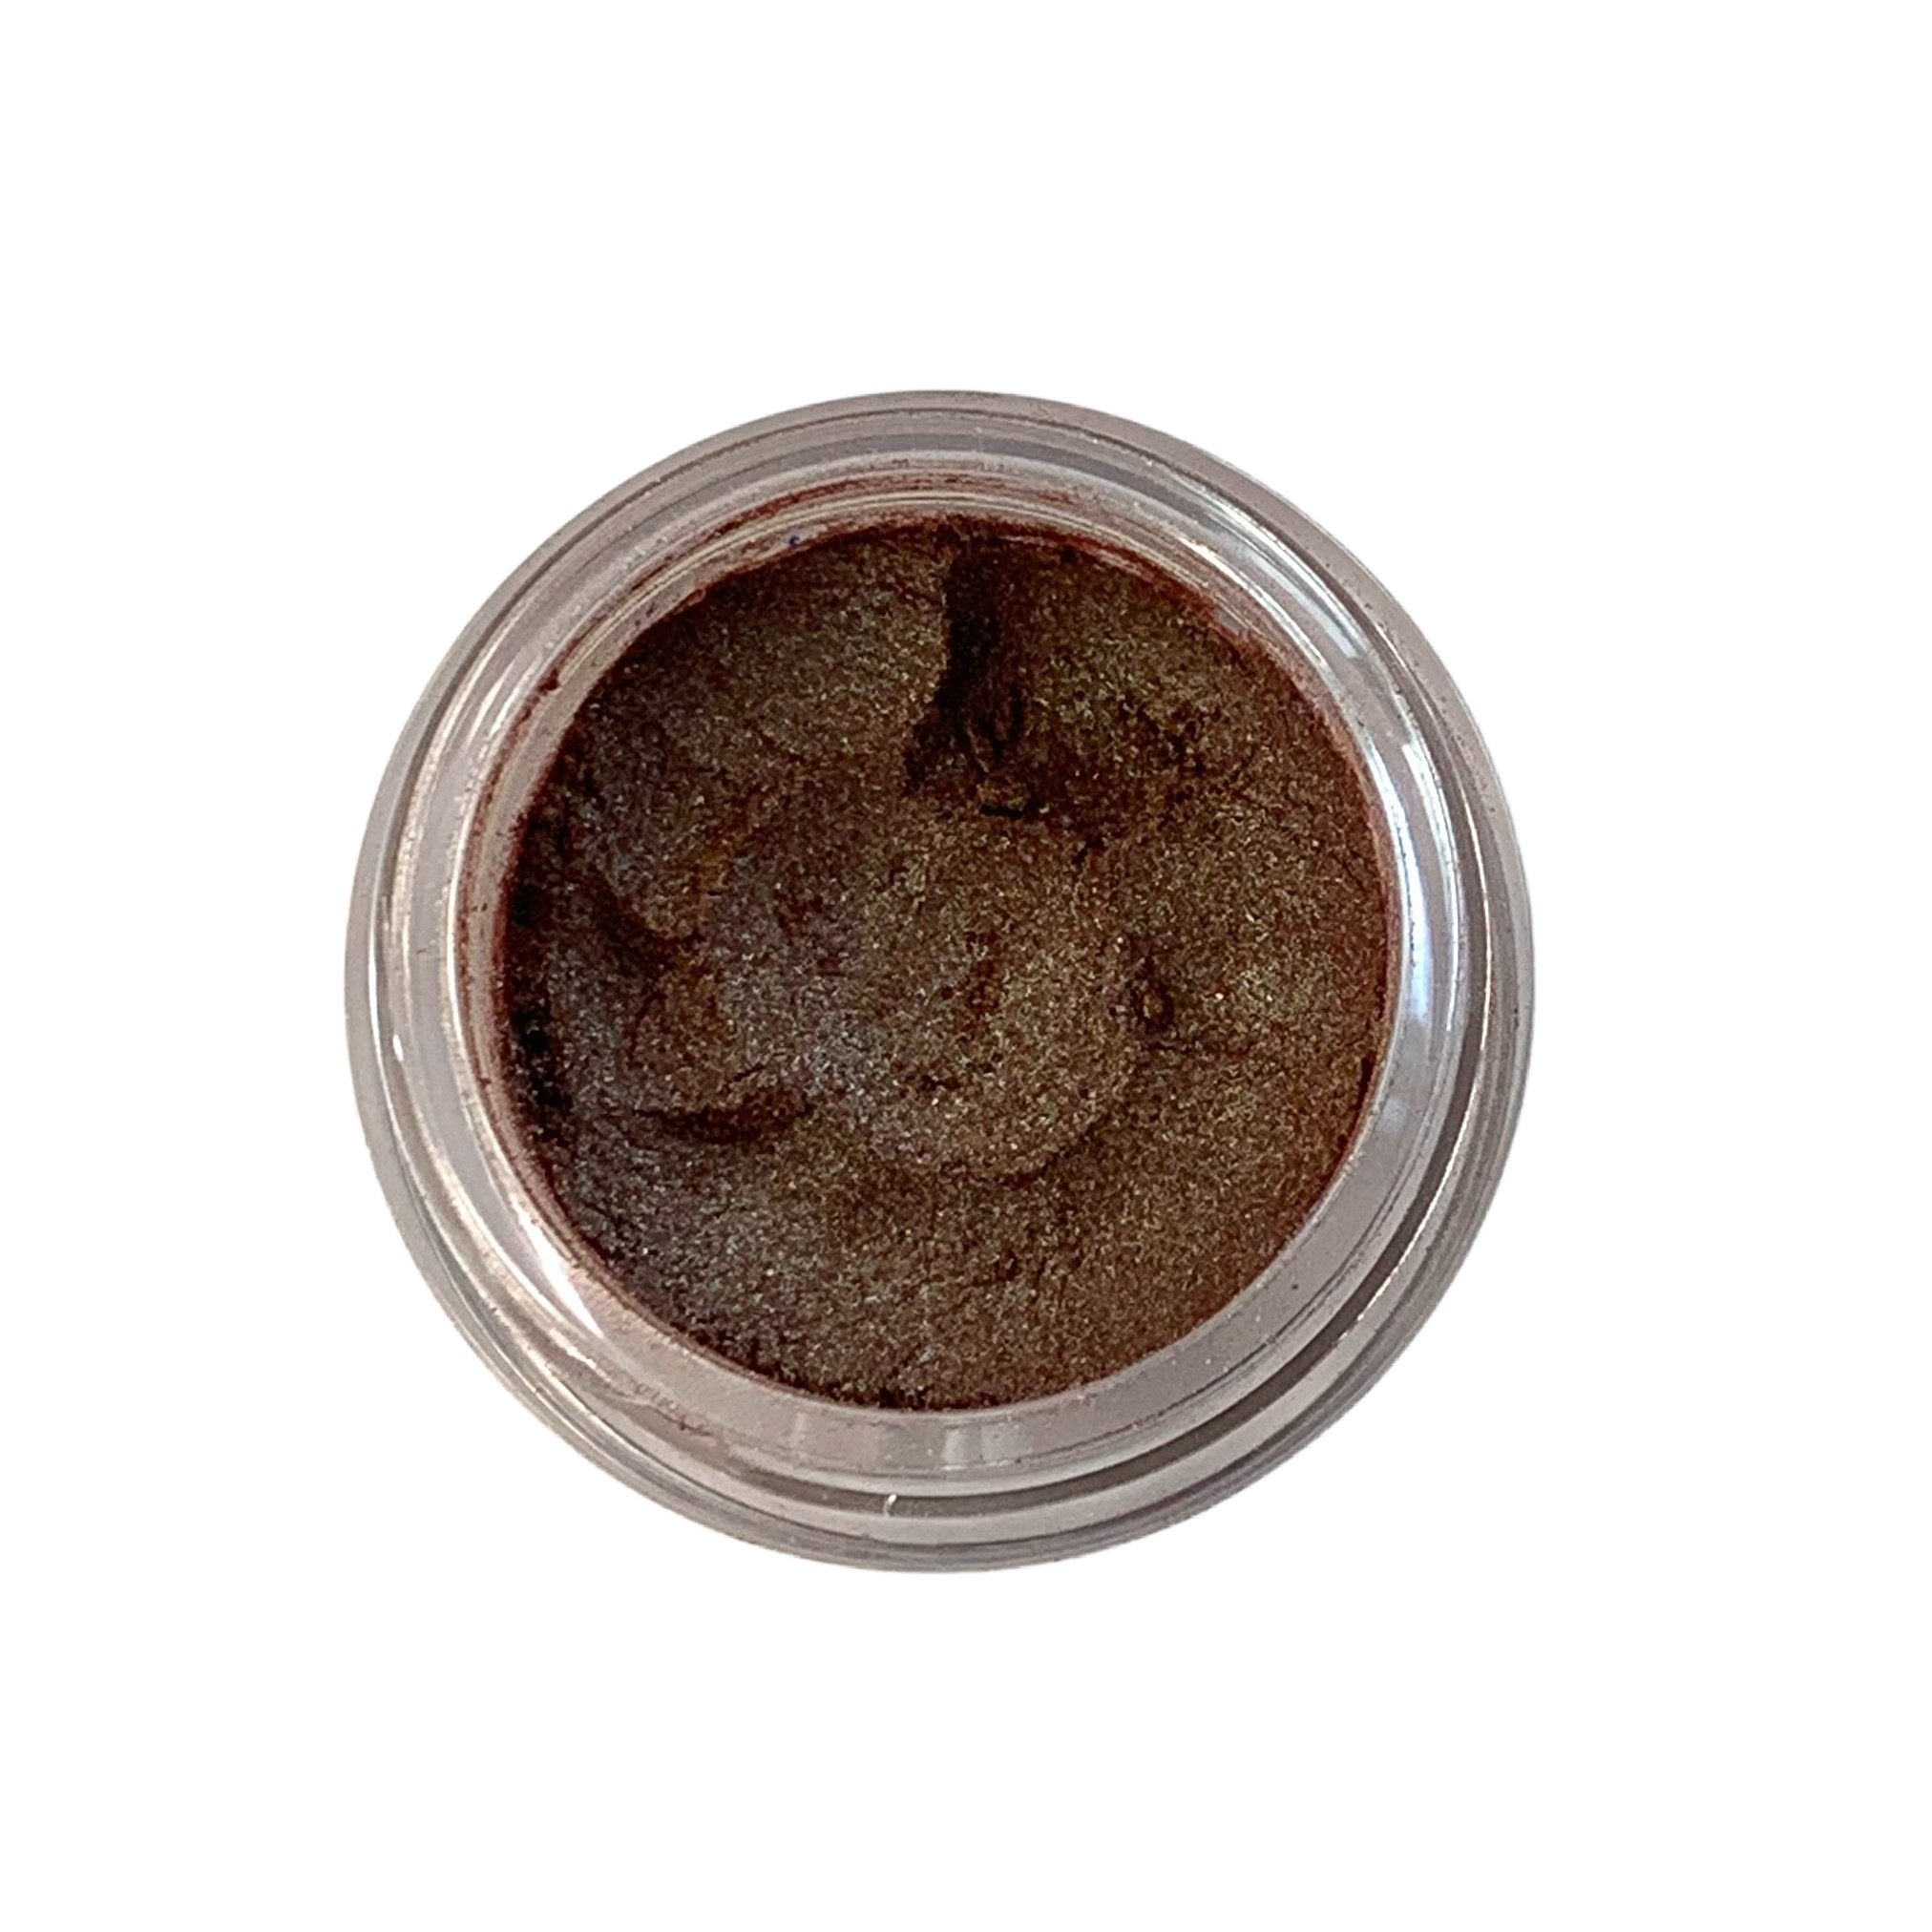 polychromatic brown eye shadow with red and blue hints. loose mineral eyeshadow, vegan and cruelty free. 10 gram sifter jar